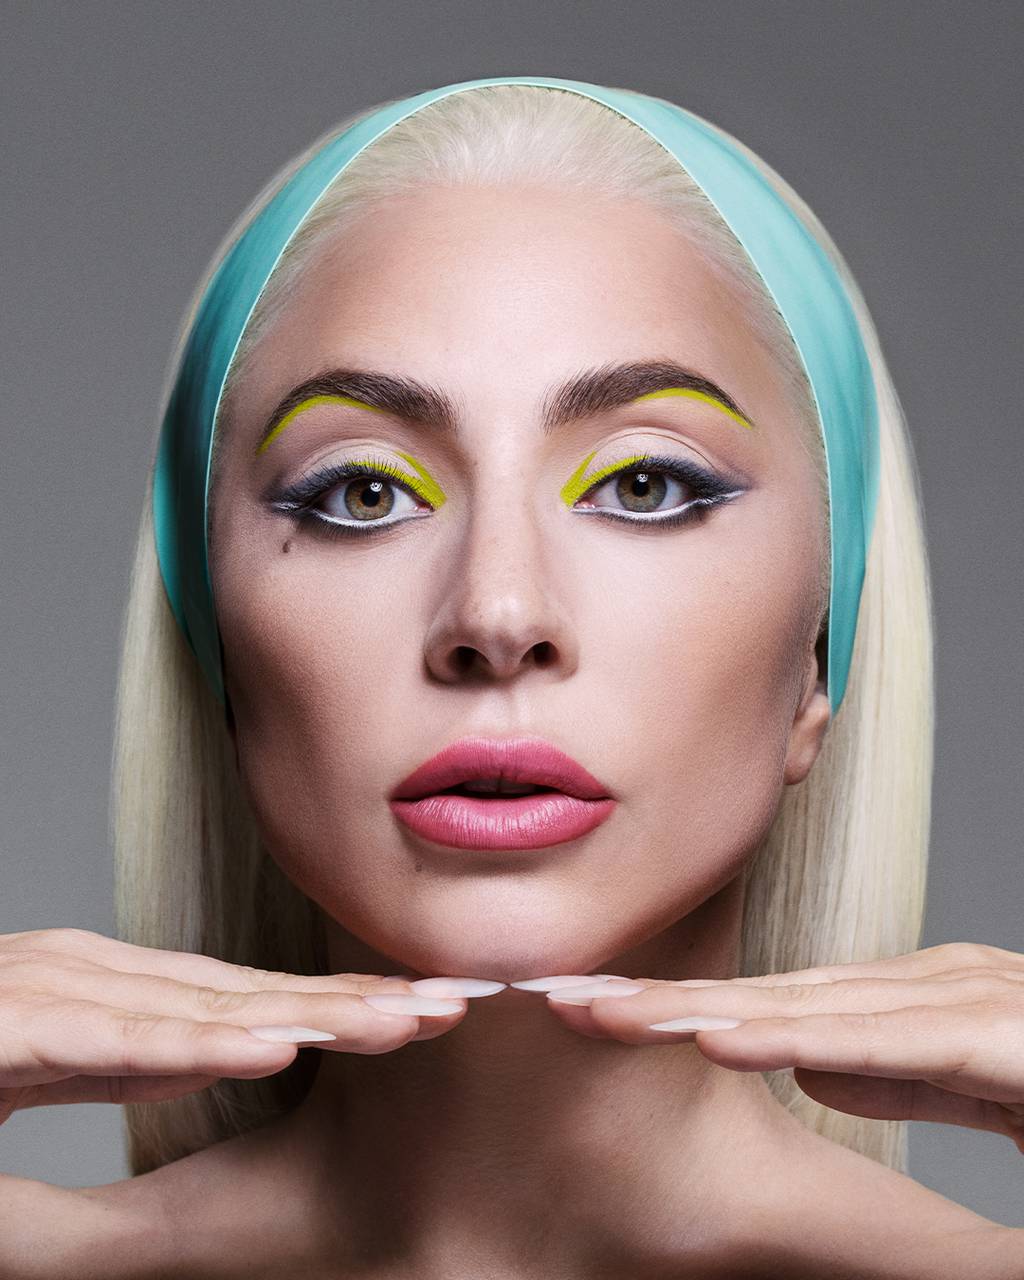 Lady Gaga's makeup brand Haus Labs is relaunching.